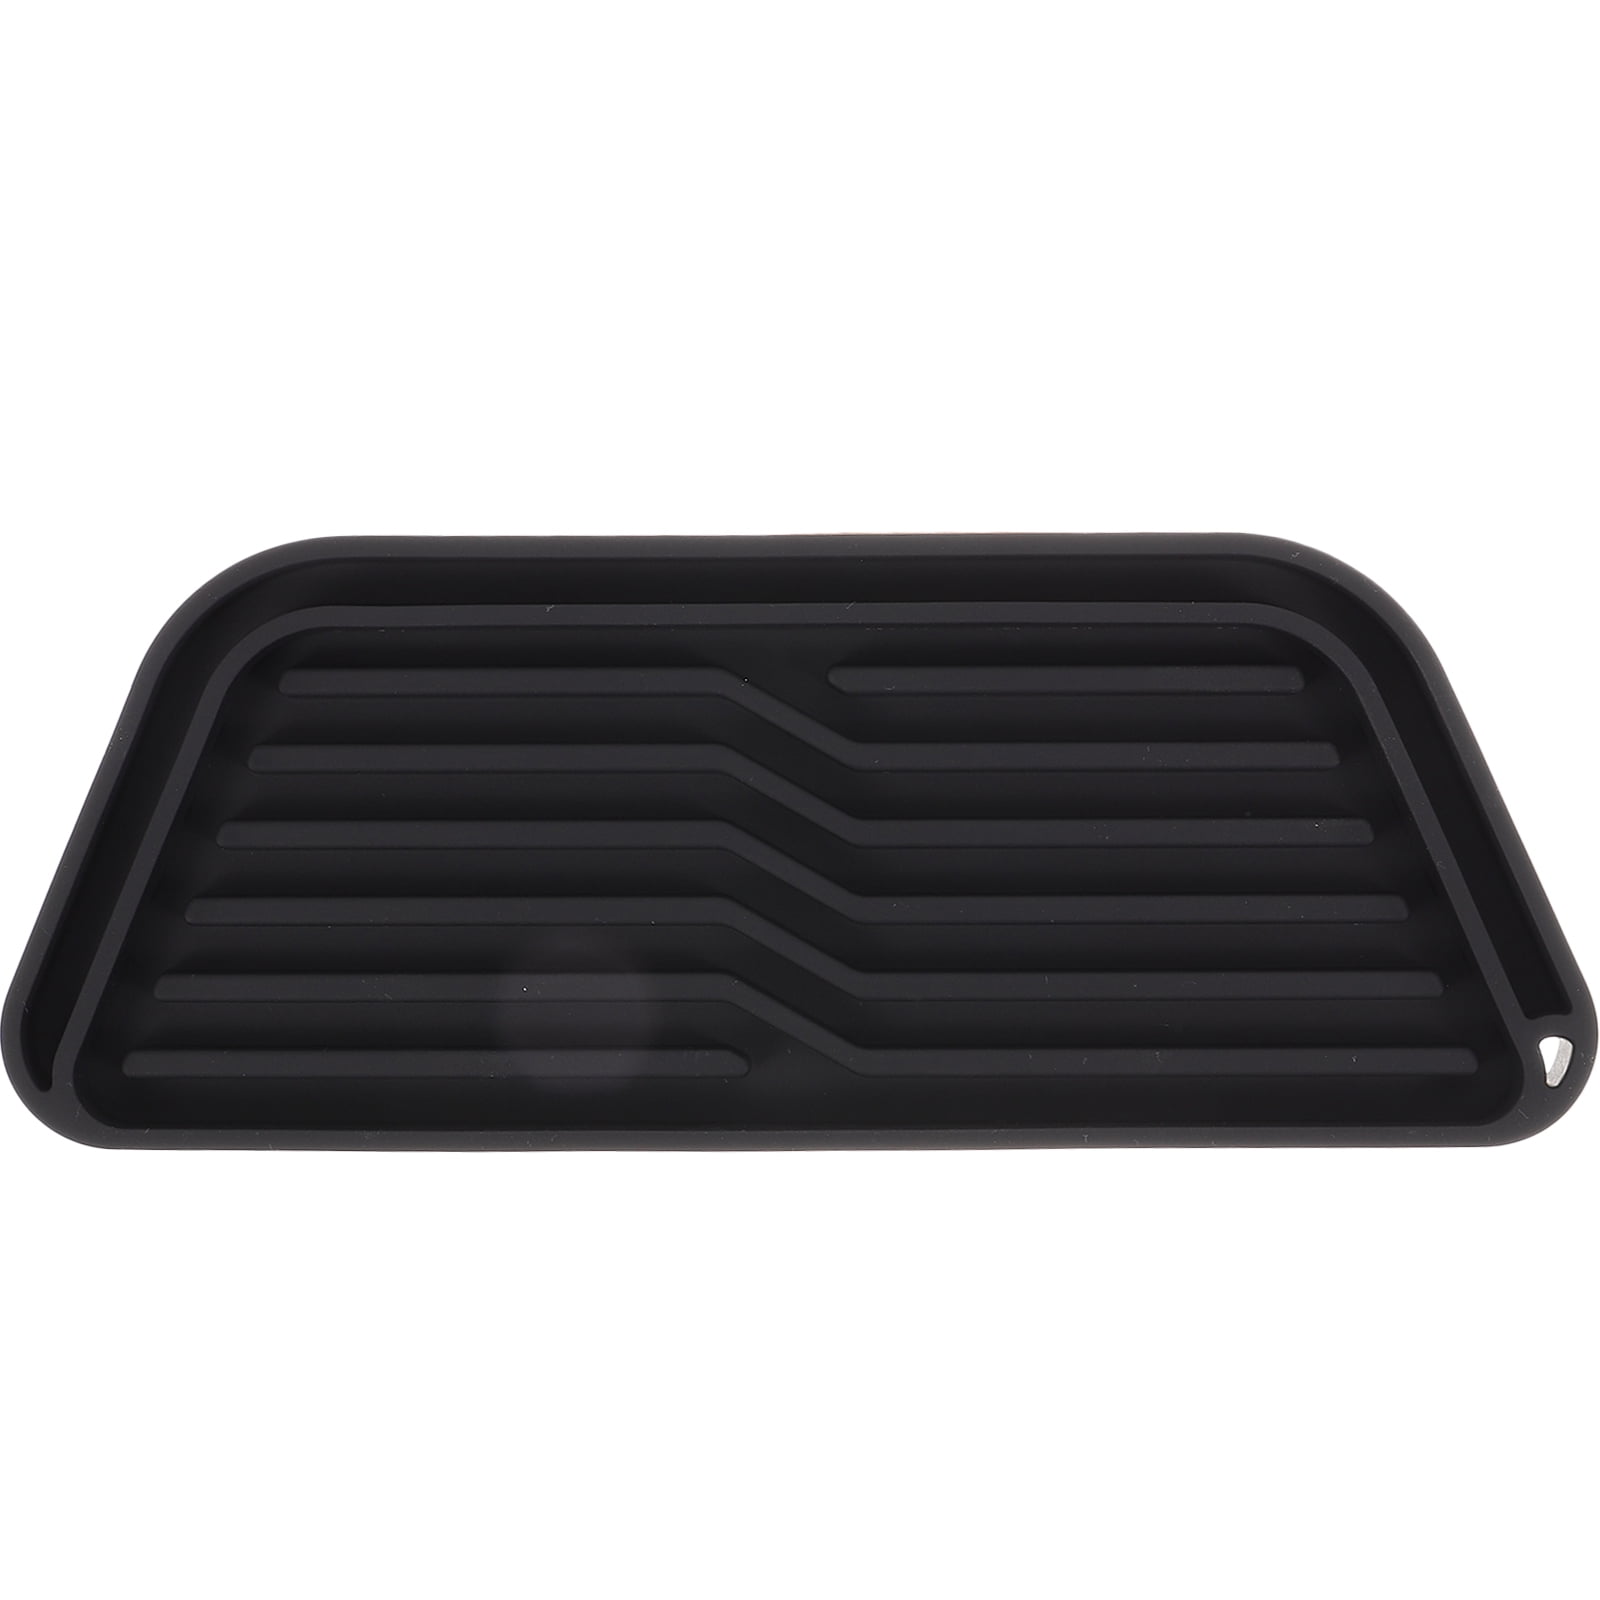 Refrigerator Drip Tray Catcher Fridge Drip Tray Water Dispenser Silicone Pan for Drainage, Size: 20.5X8.5CM